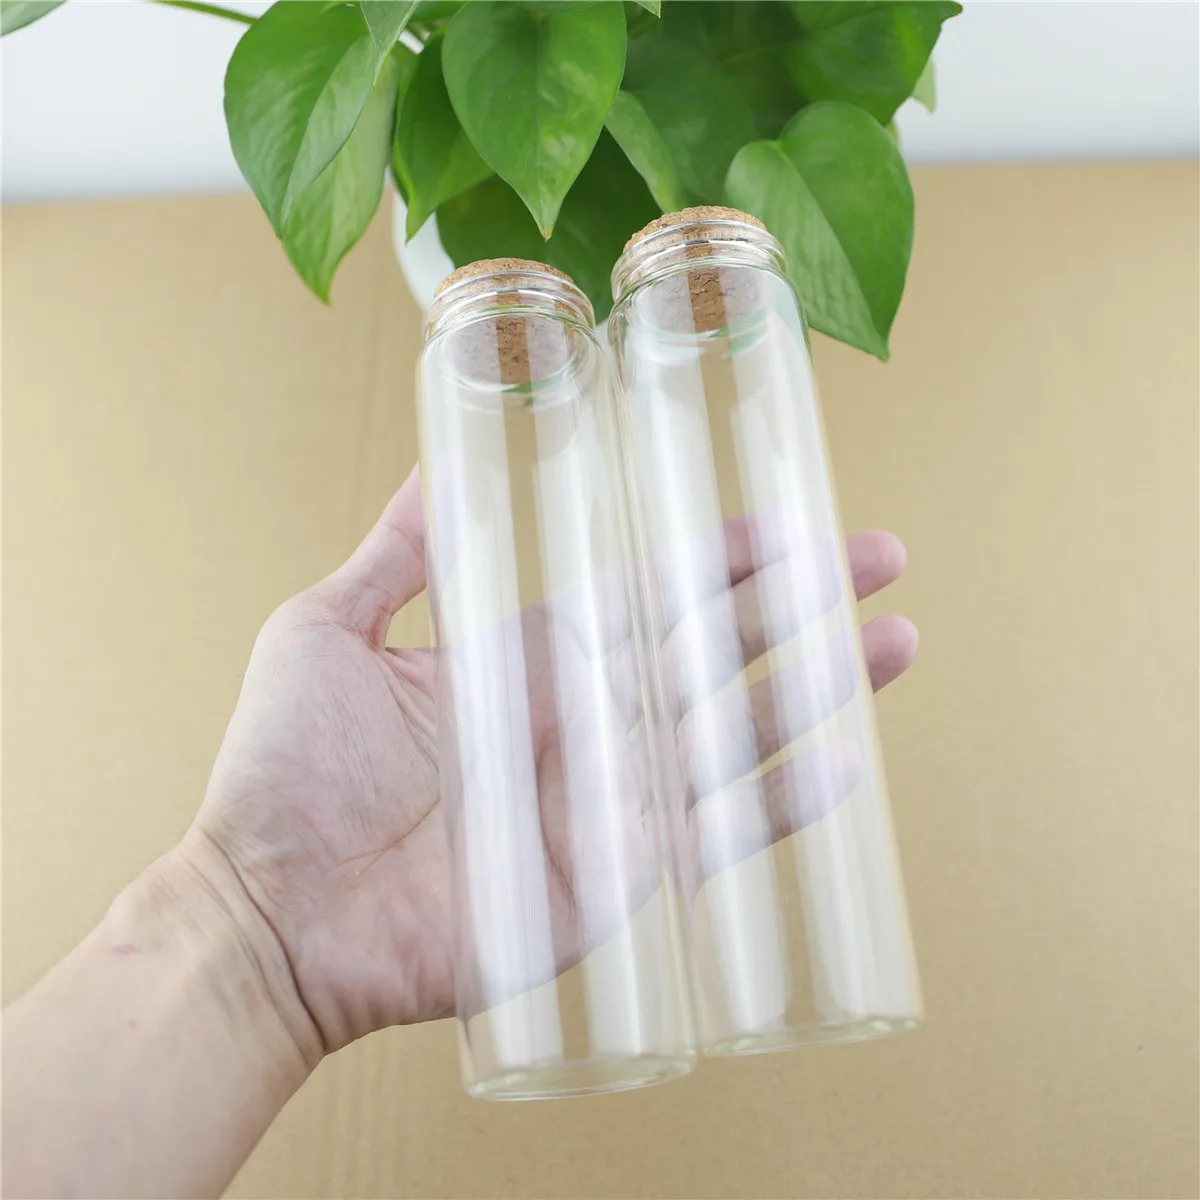 

12pcs/lot 47*180mm 240ml Cork Stopper Glass Bottles Spicy Storage Jar Bottle Food Containers Glass spice candy Jars Vials